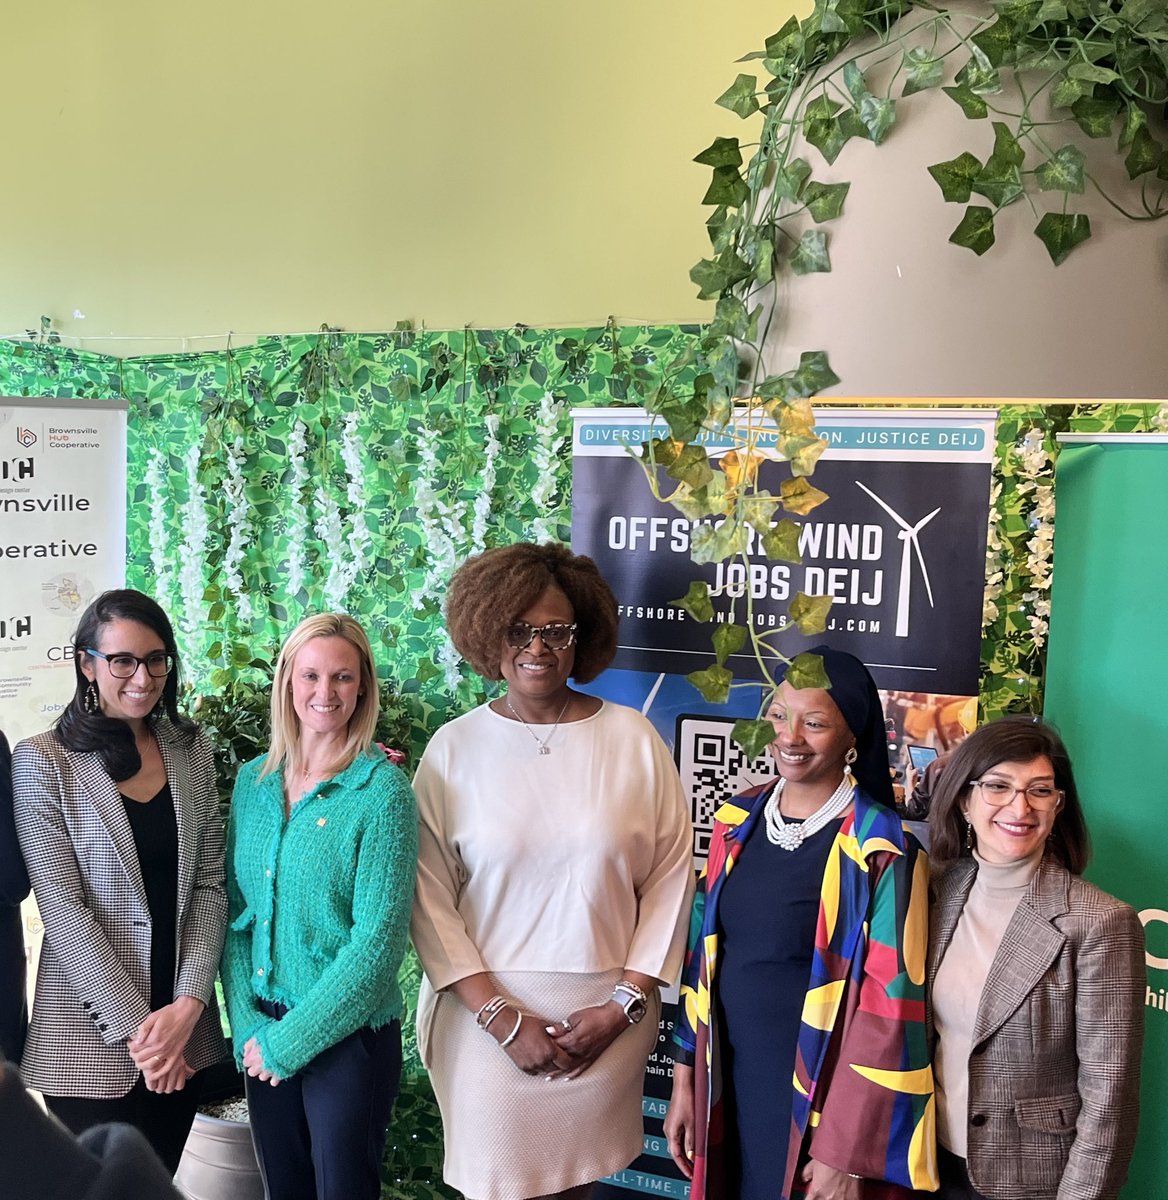 👷🏽‍♀️💨 Job training for offshore wind is coming to Brownsville! Thank you to @CBEDC_Official, @CitizensBank, @localcontentcom for bringing this opportunity home. This is just the beginning of Brownsville & East New York moving to the forefront of NYC’s clean green economy.